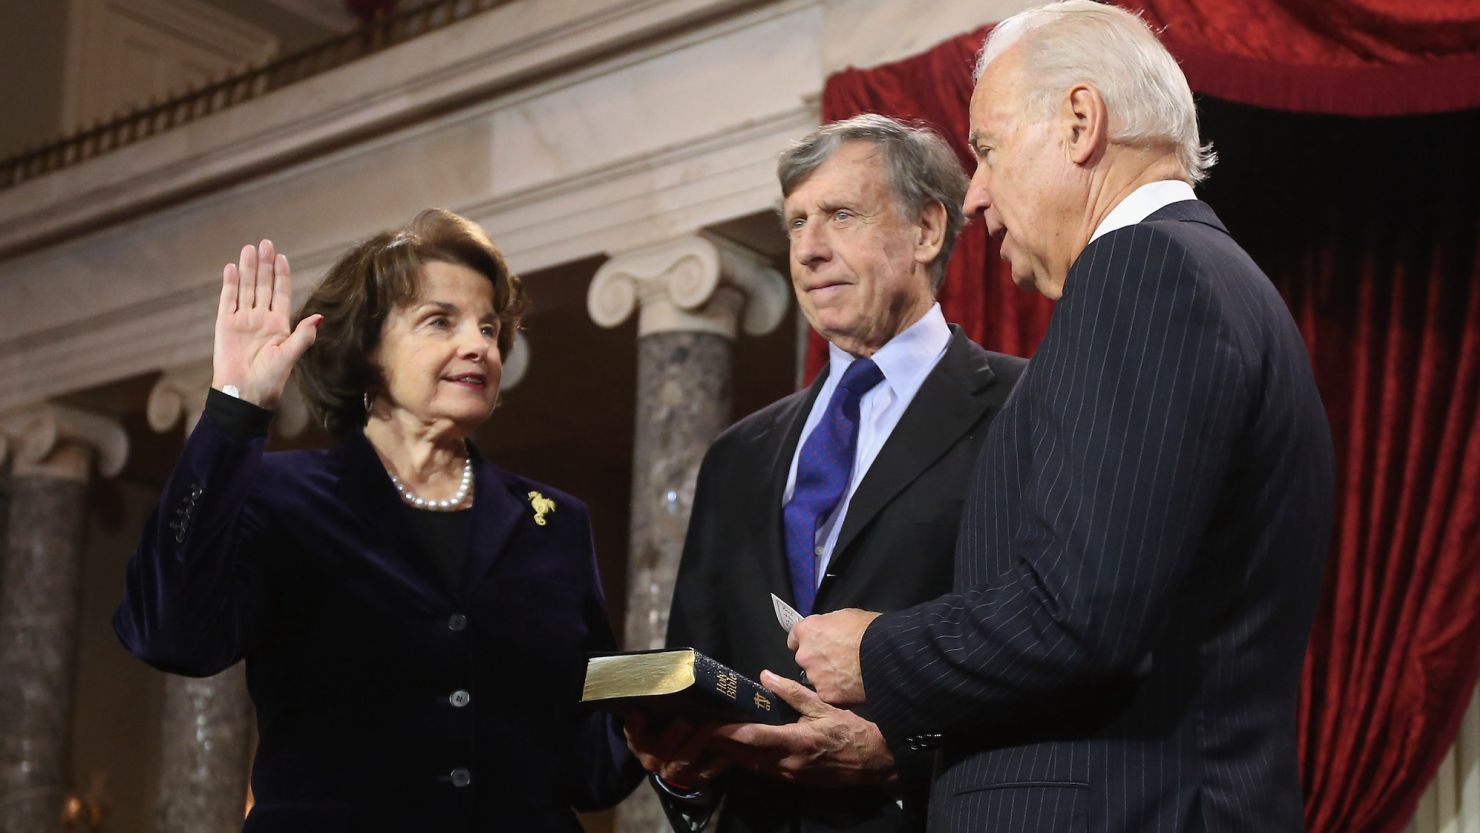 Sen. Dianne Feinstein participates in a reenacted swearing-in with her husband Richard Blum and Vice President Joe Biden on January 3, 2013 in Washington, DC.